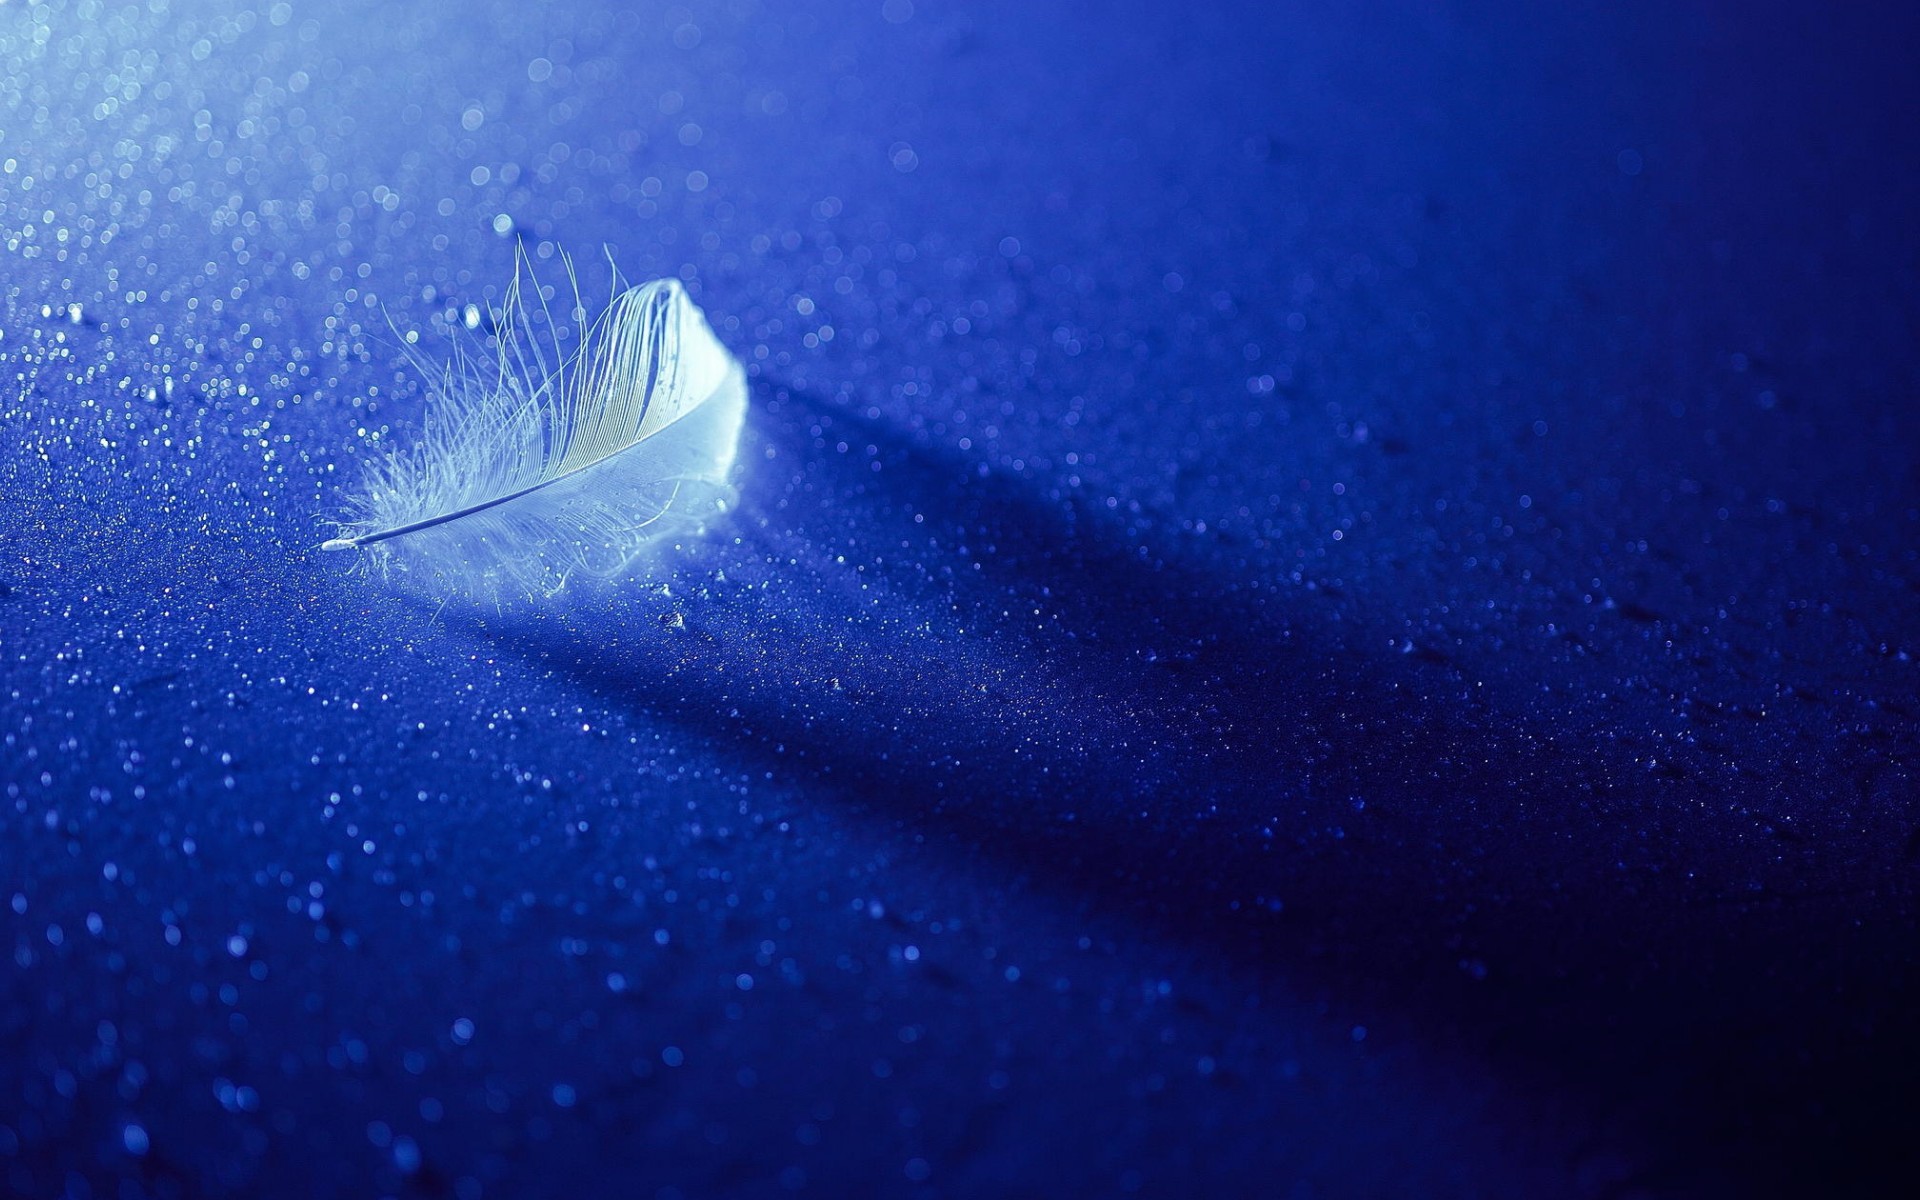 HD blue feather wallpapers